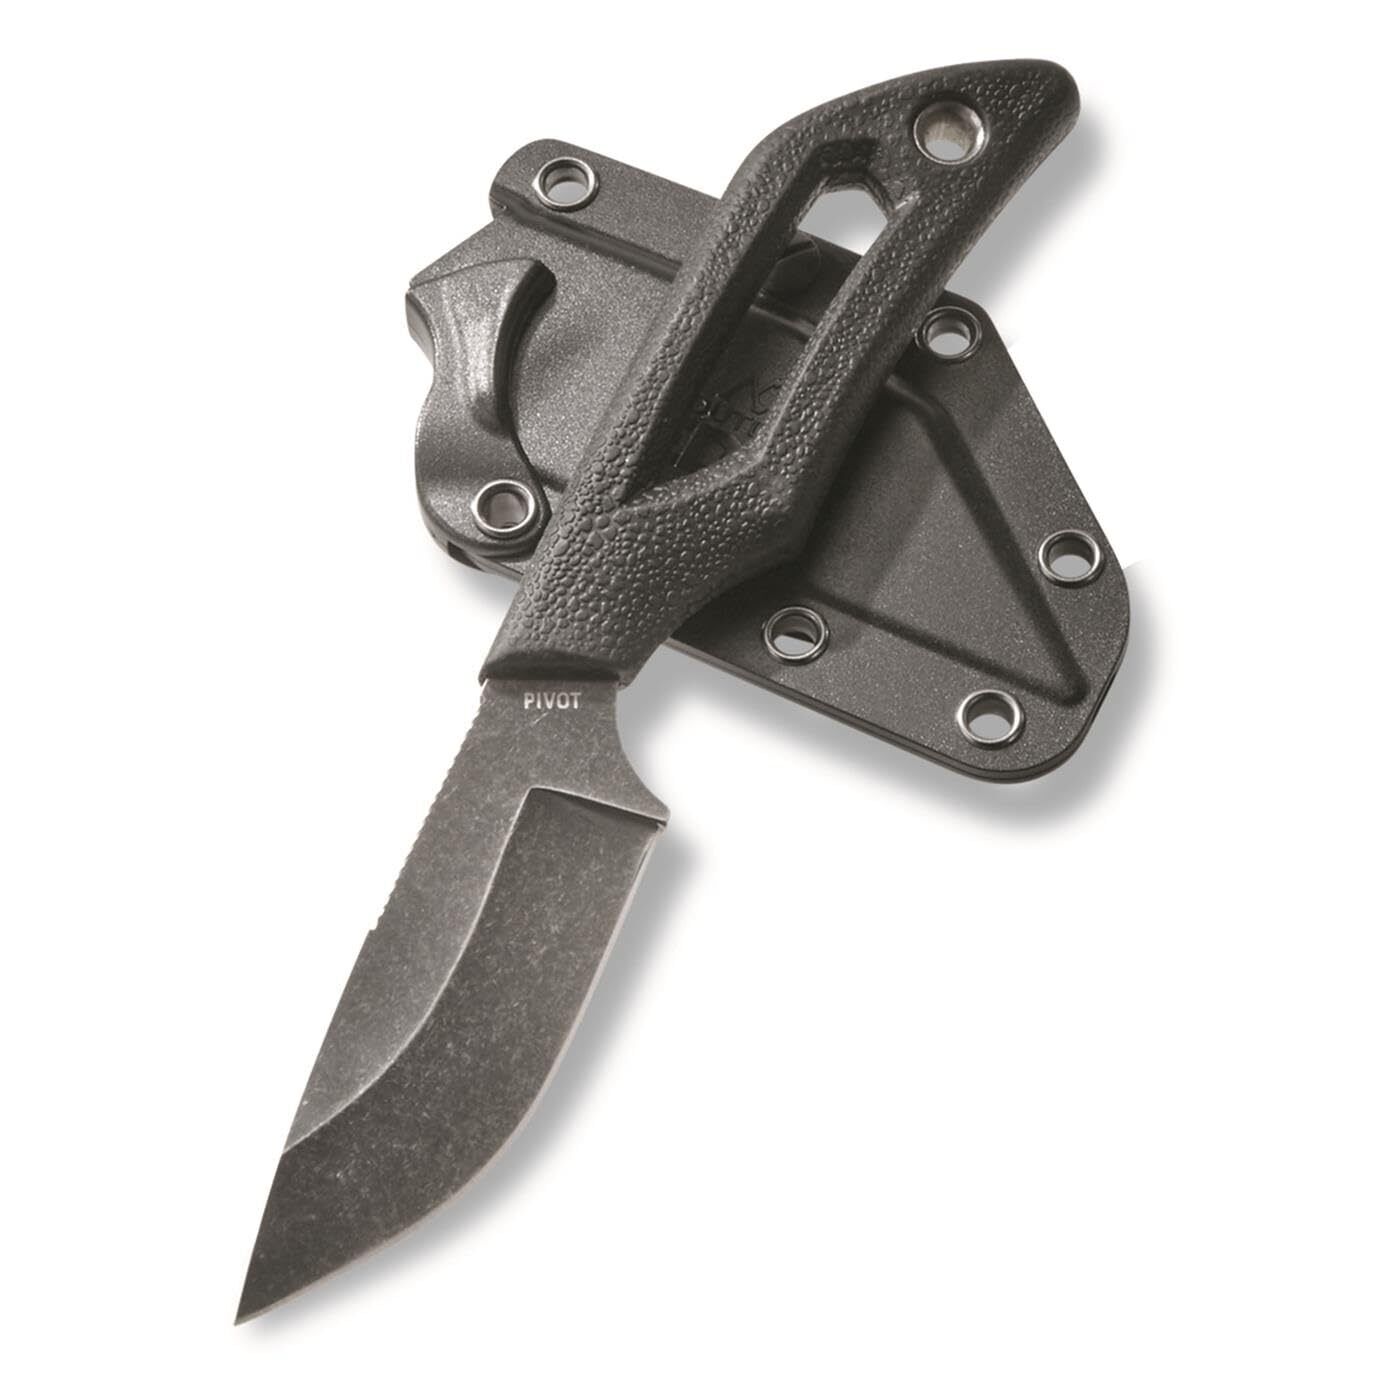 OUTDOOR EDGE Pivot Drop-Point Small Fixed Blade Tactical Knife with Sheath - EDC